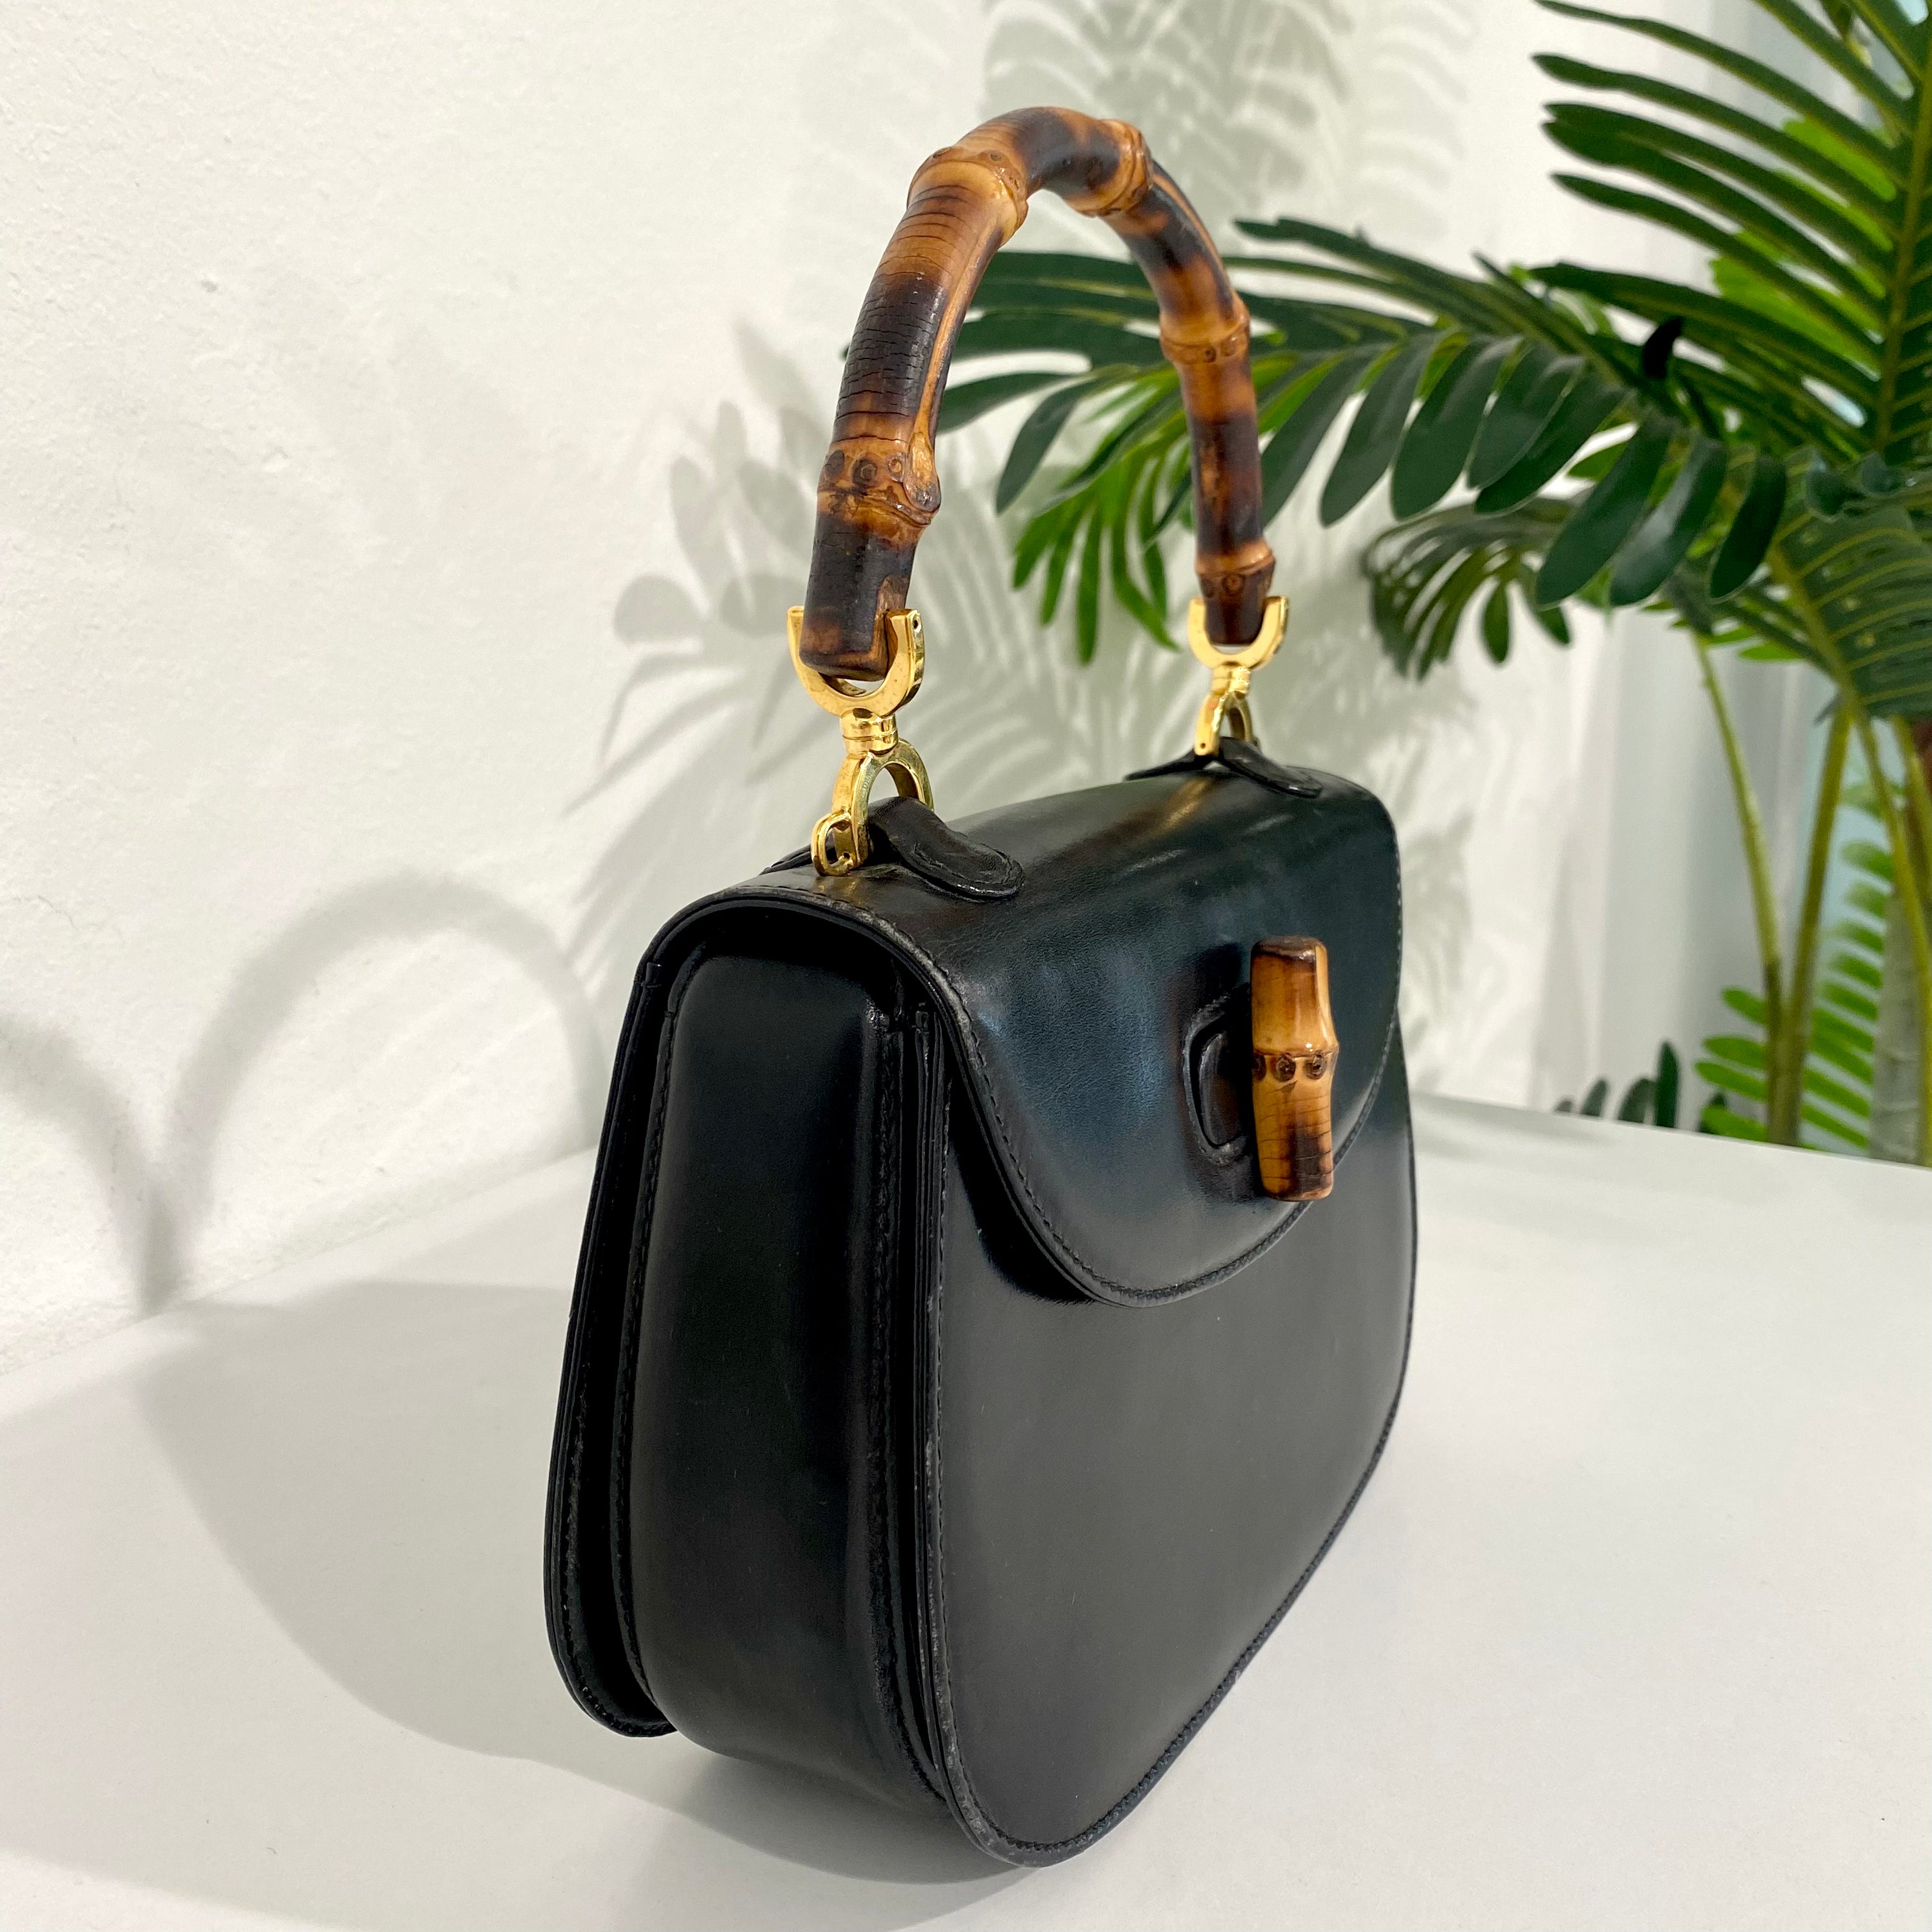 Limited Edition Gucci Bamboo Handbag in black leather – Fancy Lux